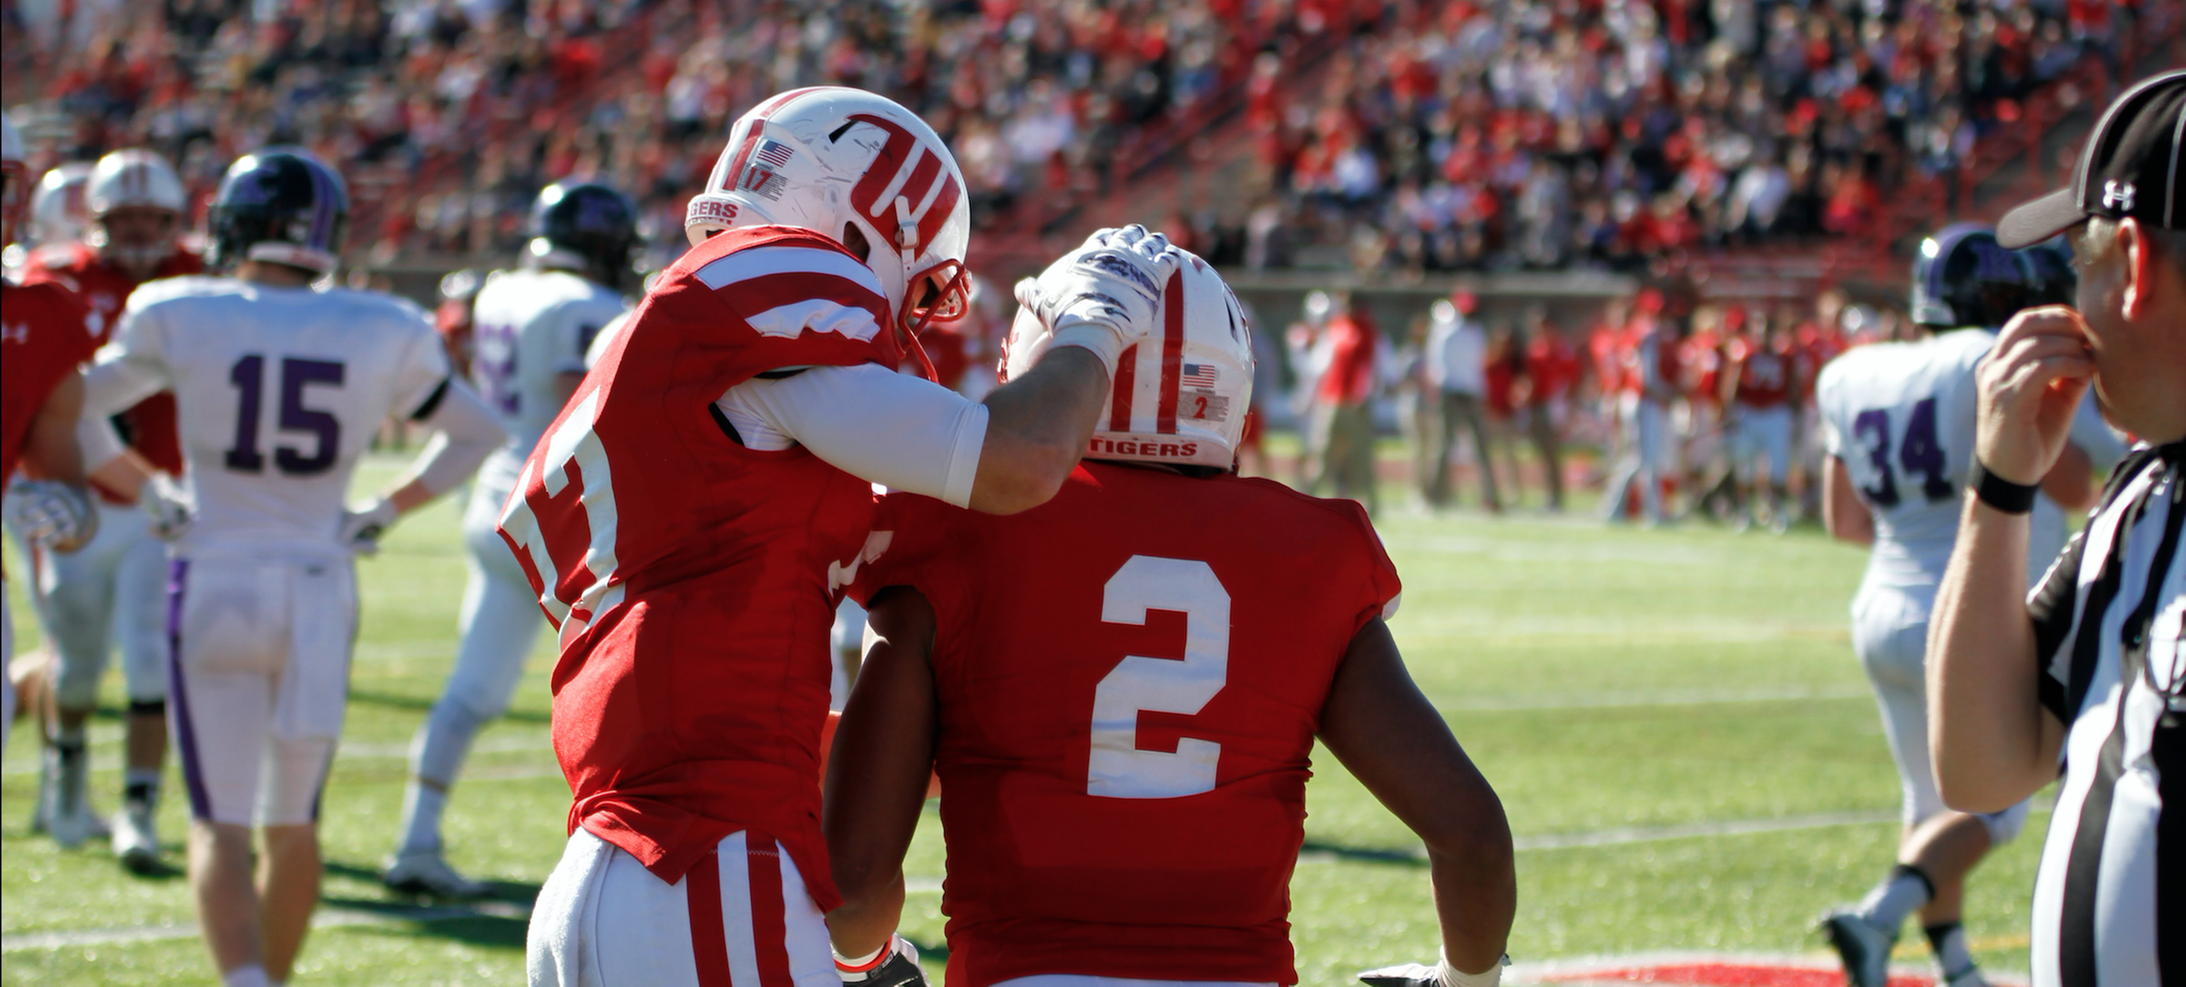 #17 Wittenberg Football Caps Off 2016 with Second-Round NCAA Playoff Loss to #2 Wisconsin Whitewater